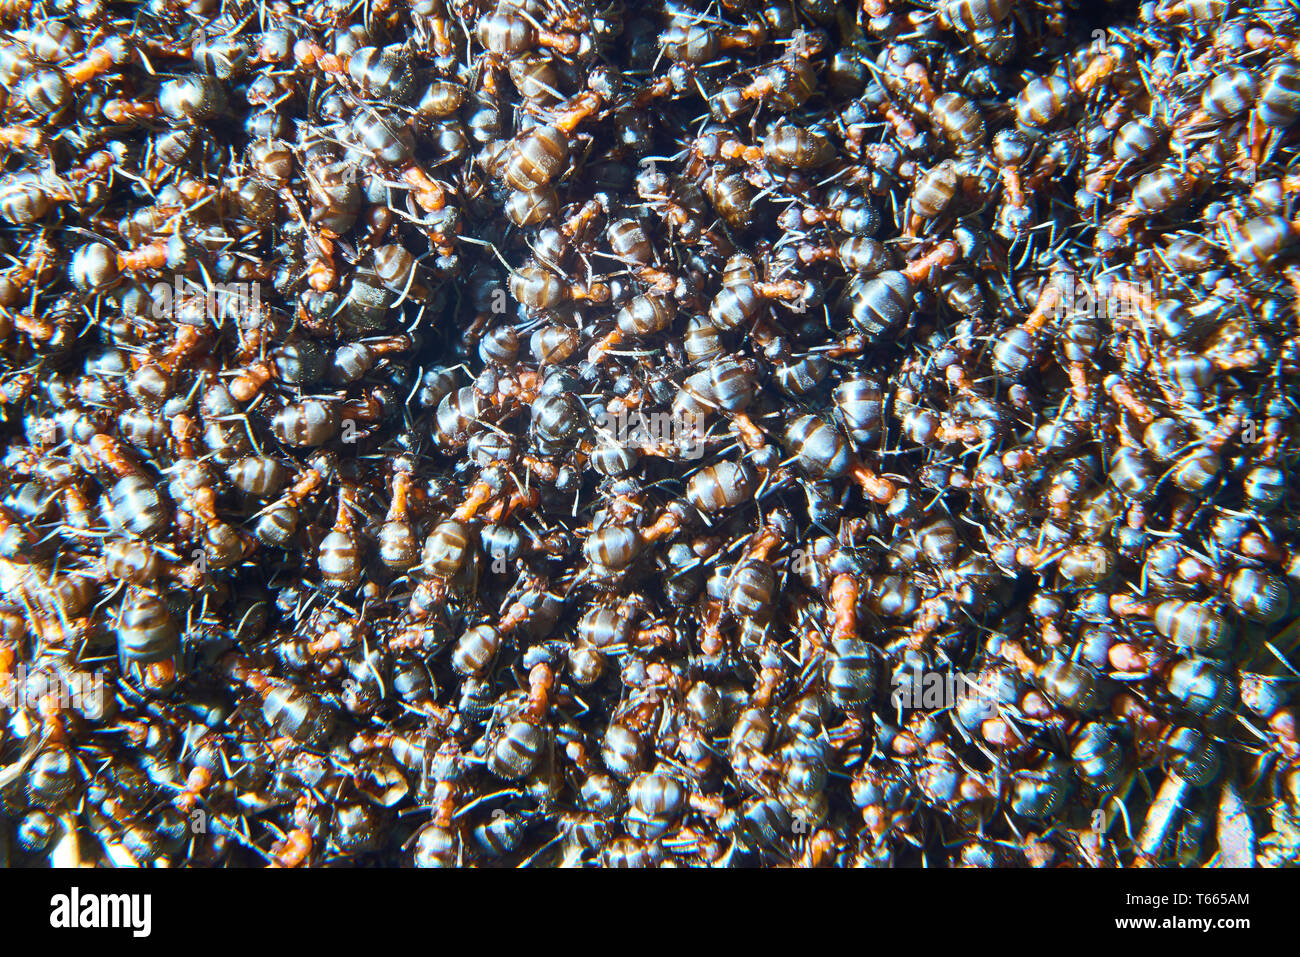 Large group of Formica polyctena ants. Formica polyctena is a species of European red wood ant. Focused to center Stock Photo